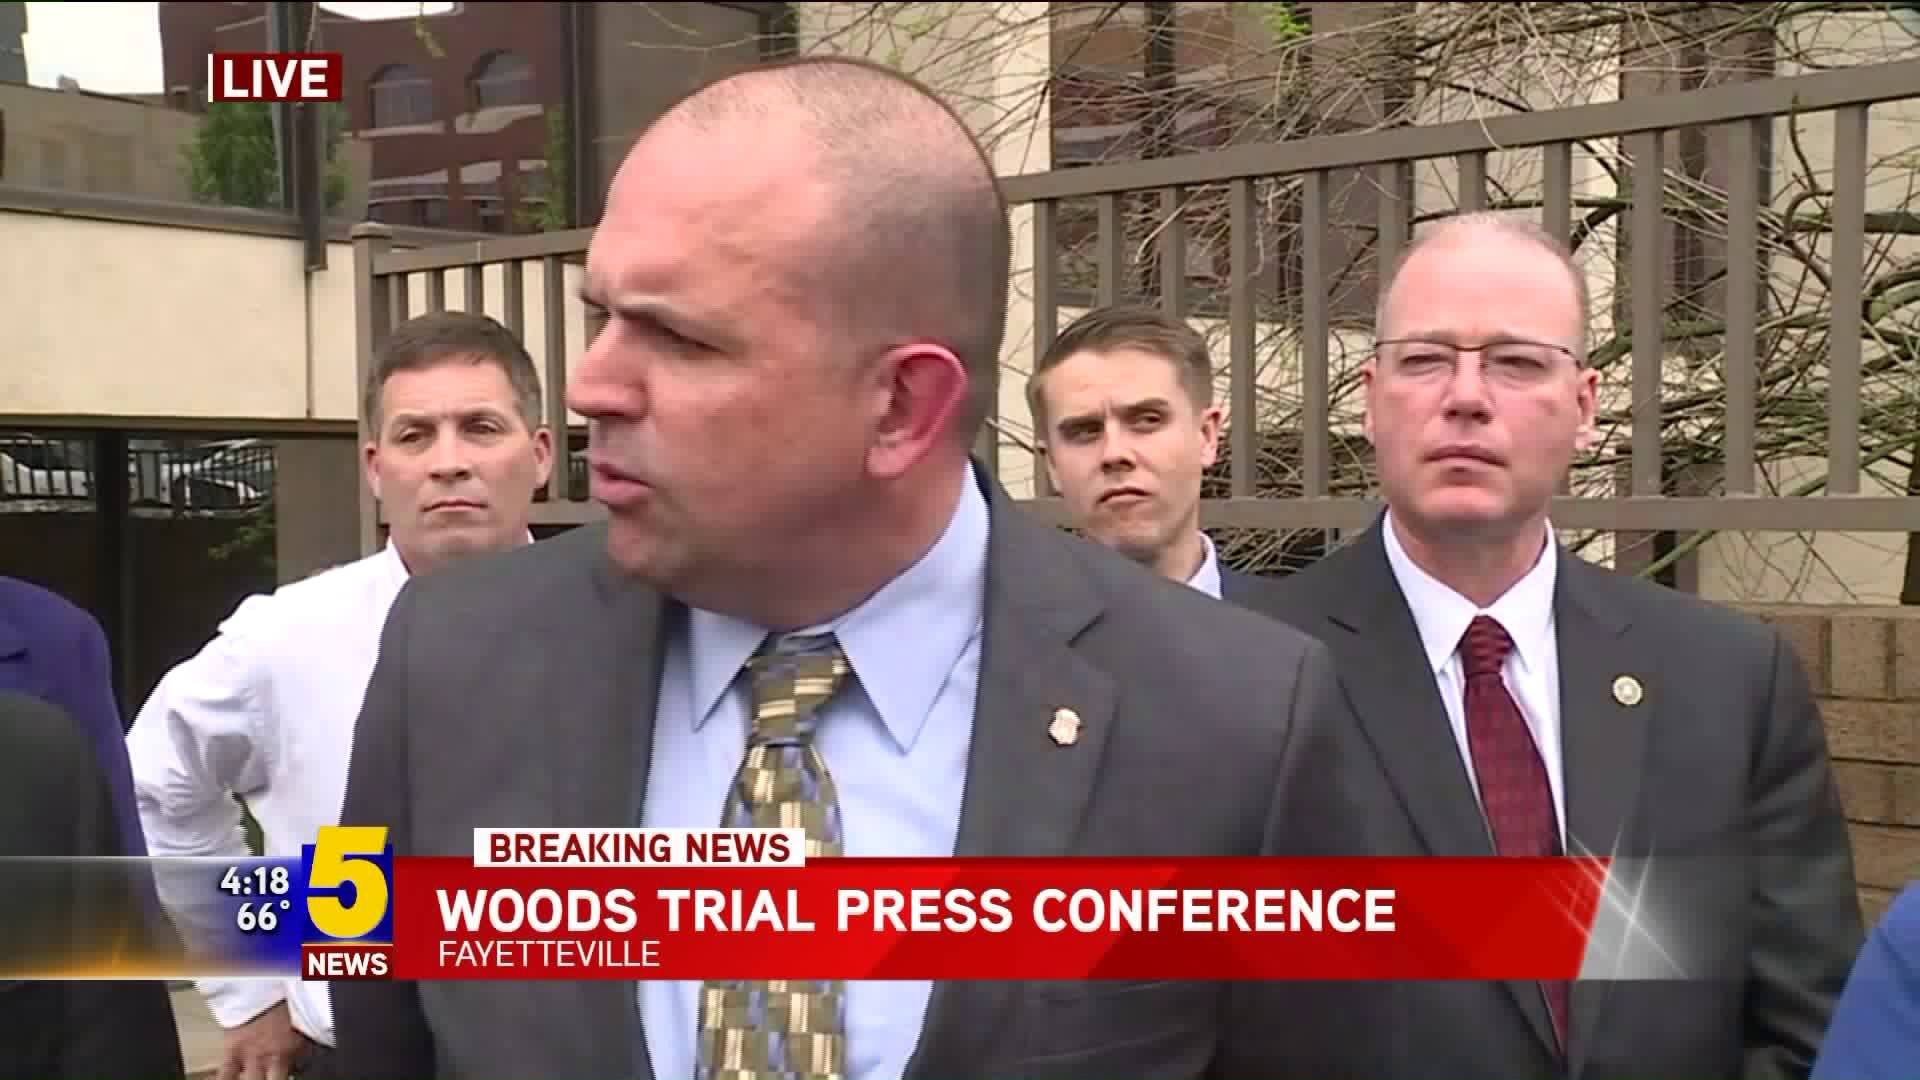 Woods Trial Press Conference